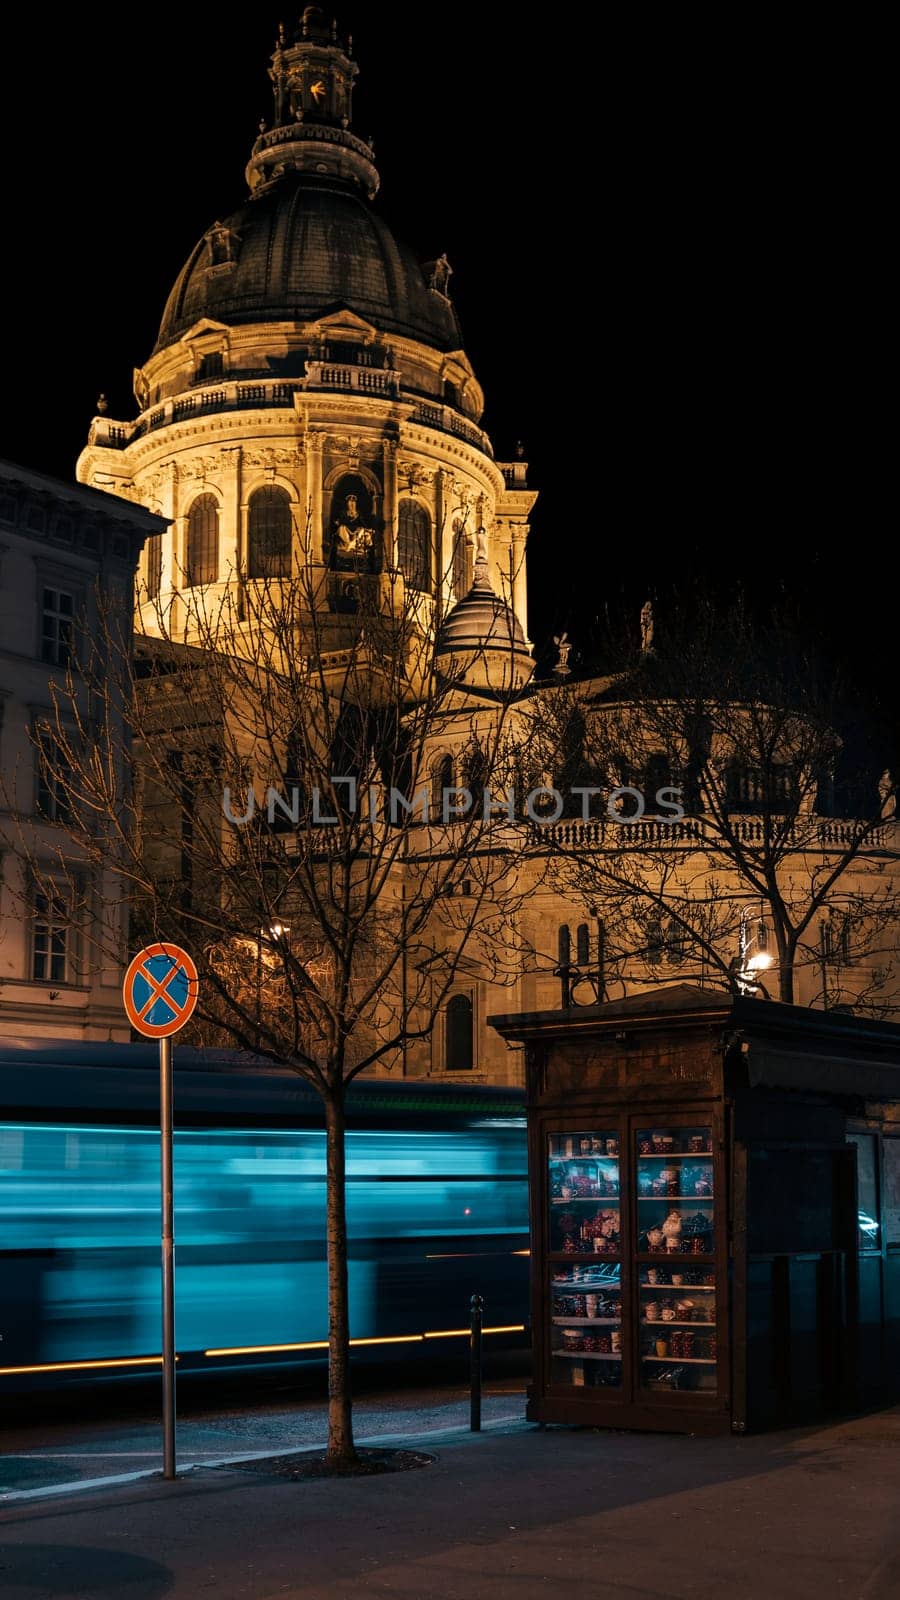 An illuminated Hungarian city comes alive in the evening. Landmarks including a cathedral and newsstand are visible alongside blurry buses and traffic.